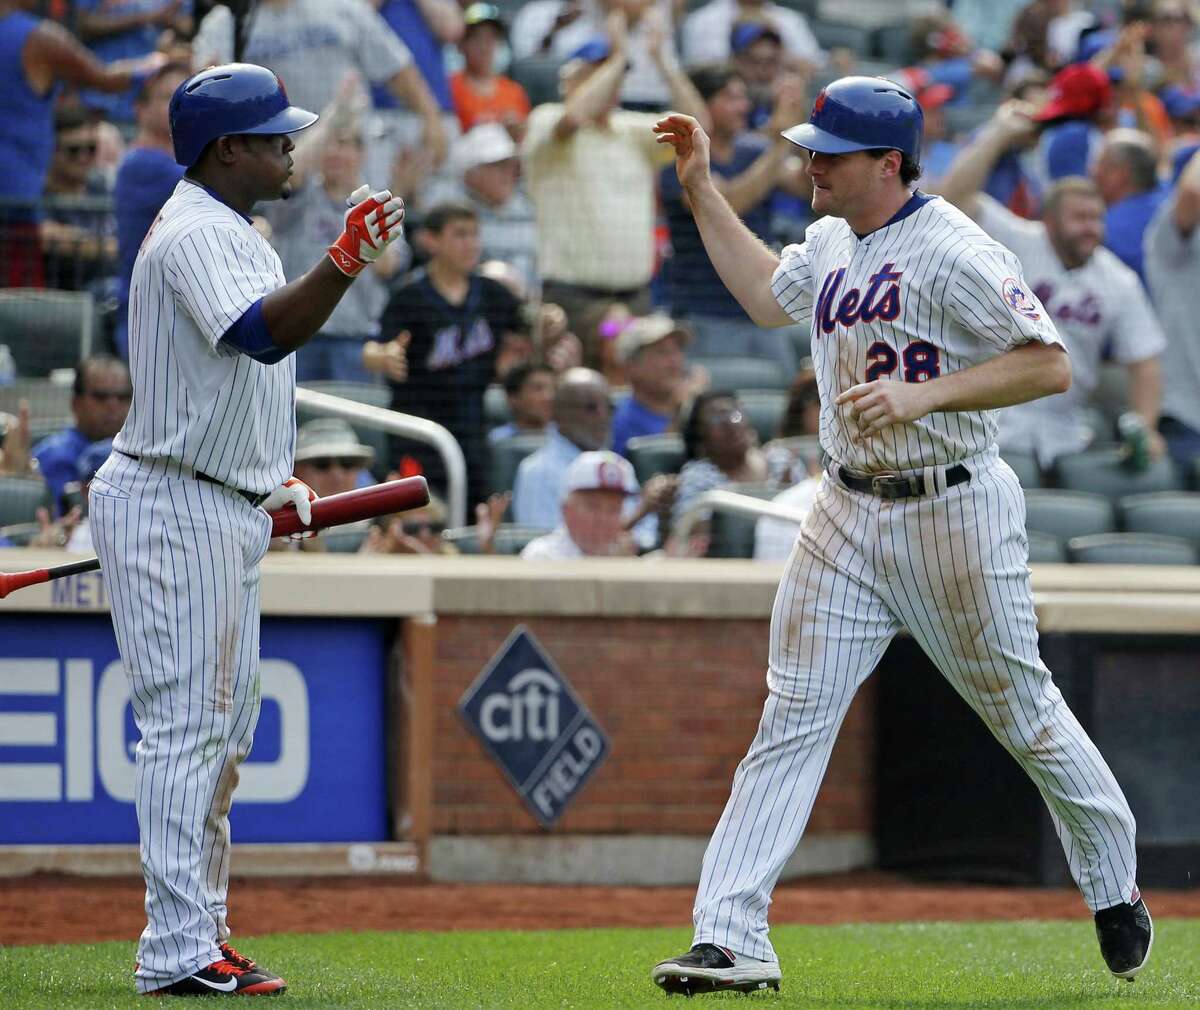 The Mets’ Juan Uribe, left, greets Mets Daniel Murphy after Murphy scored the go-ahead run in the seventh inning on Sunday.